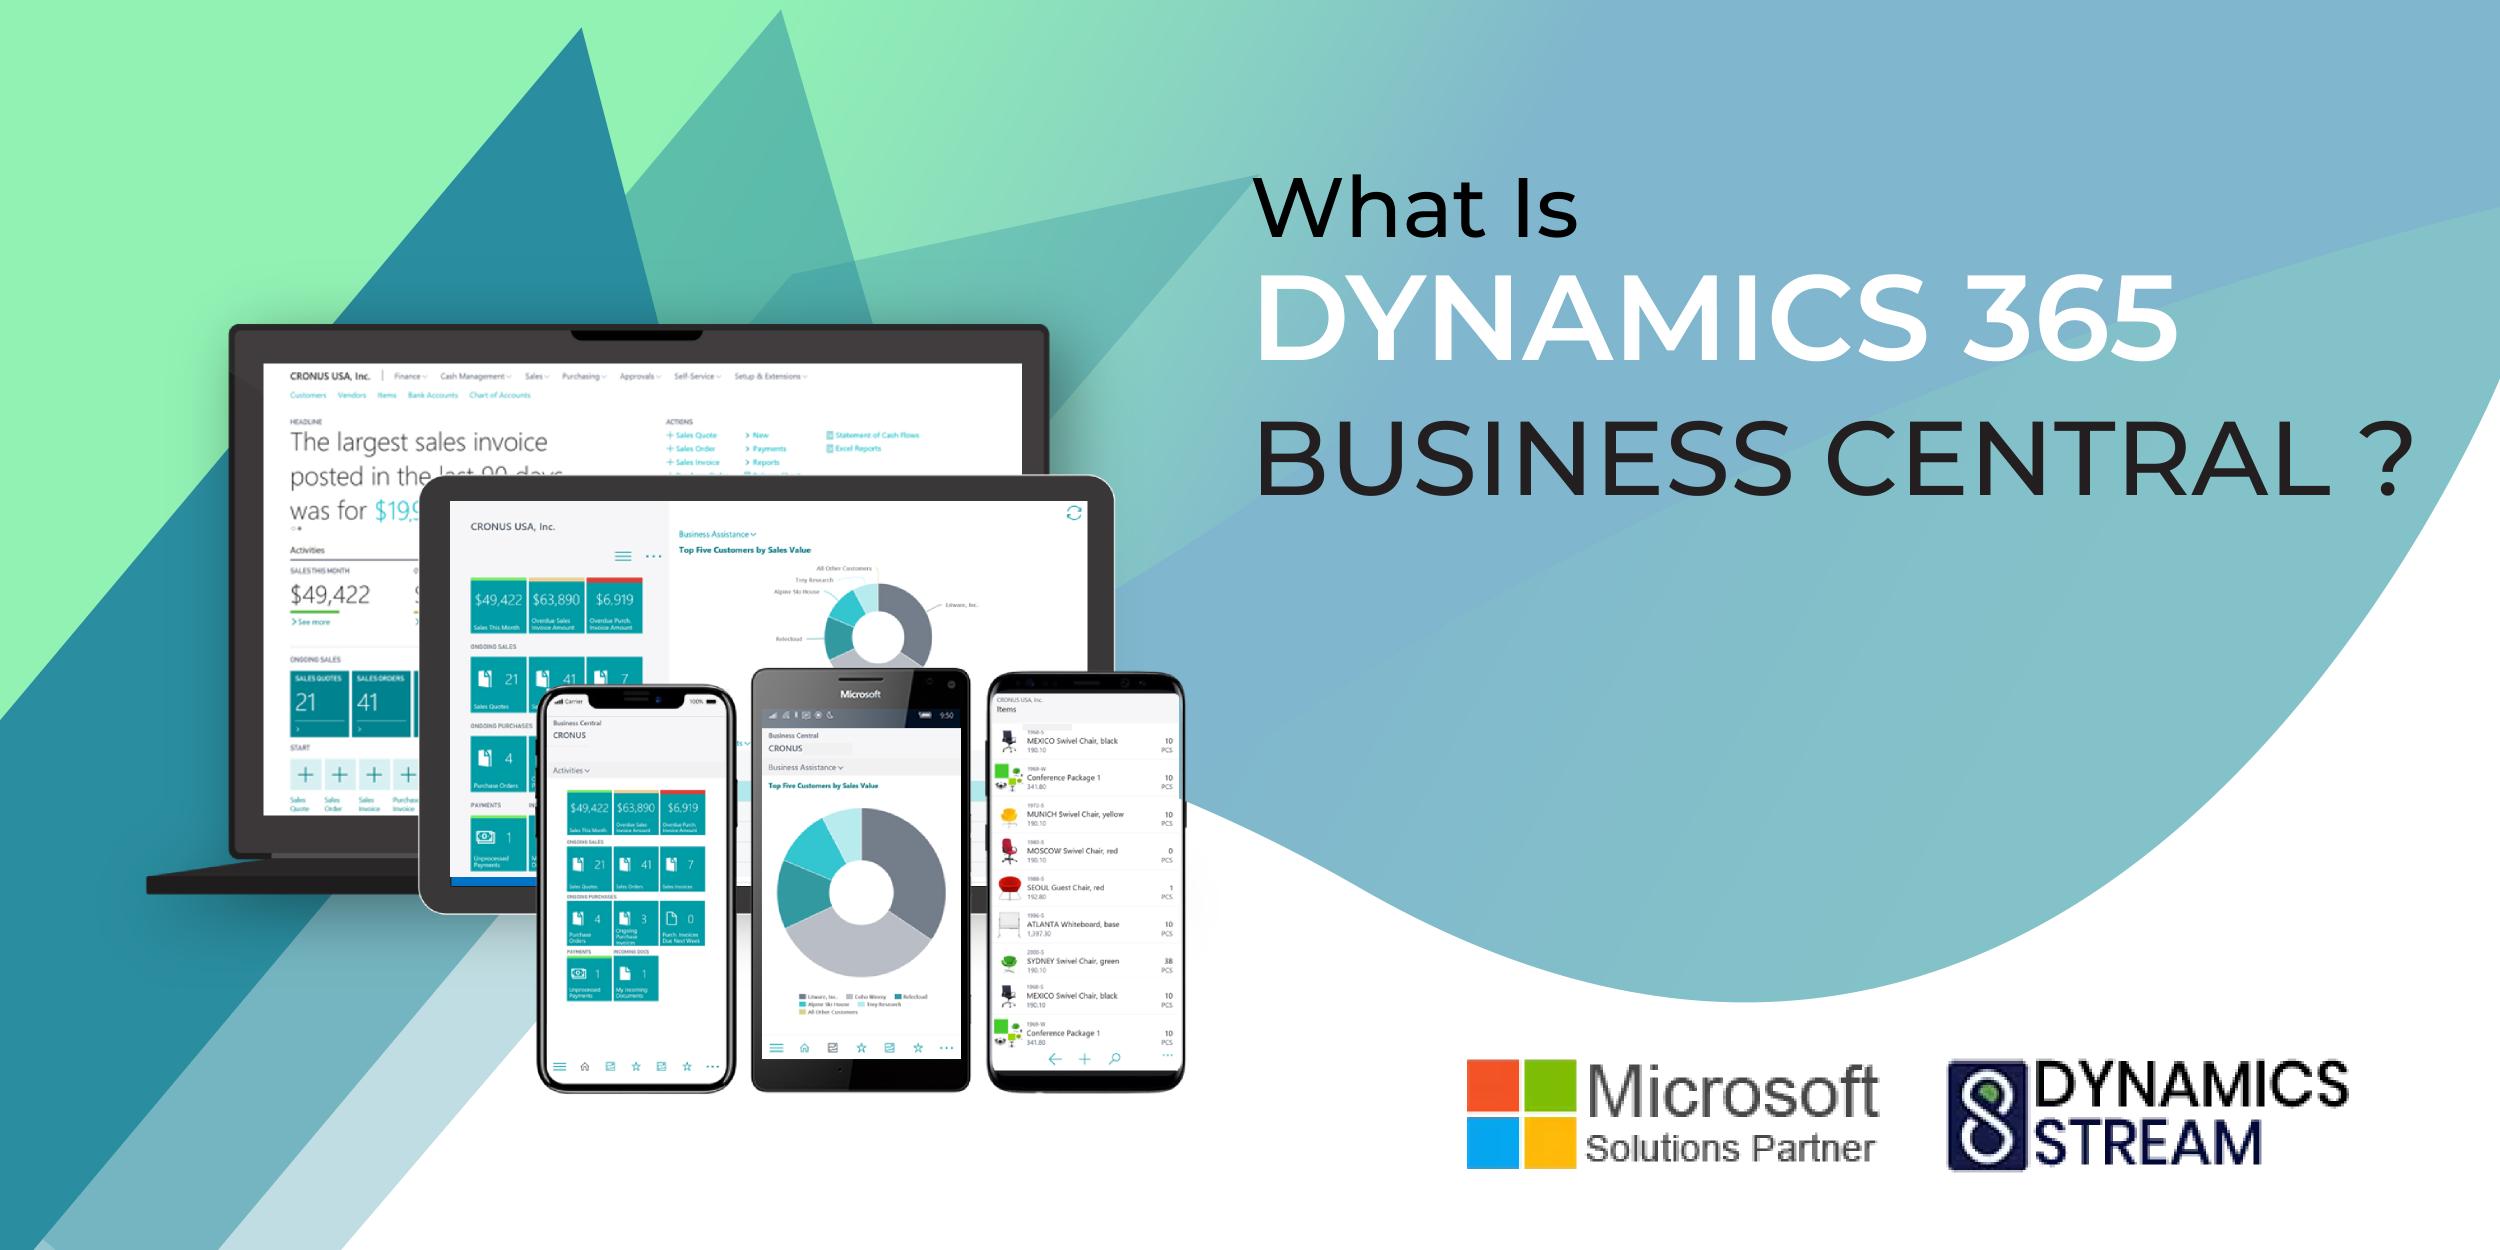 What is Dynamics 365 Business Central?